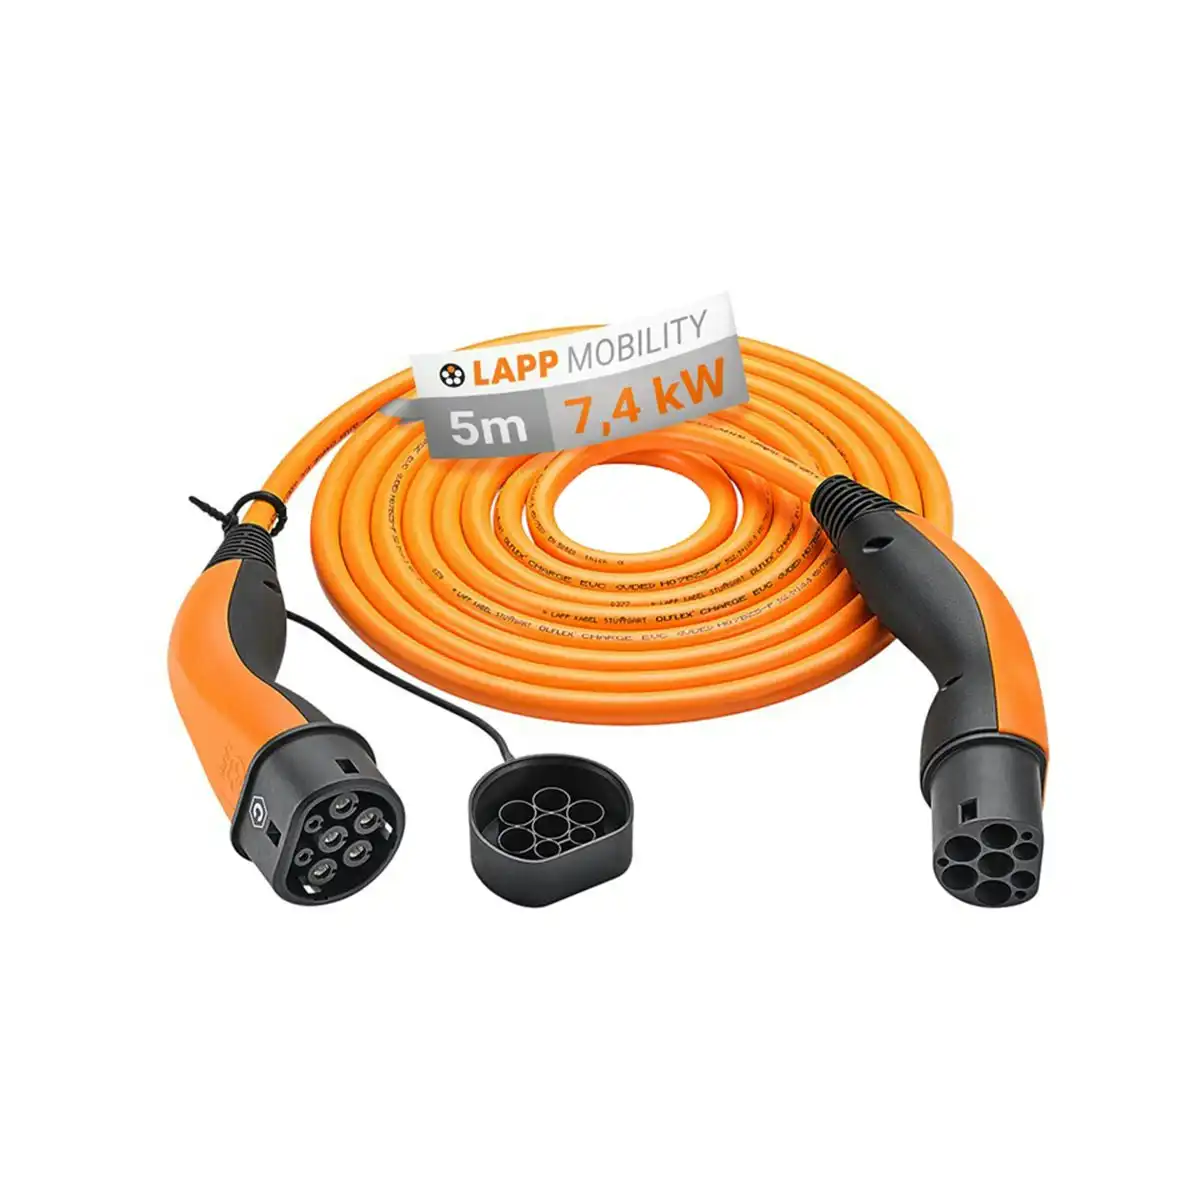 LAPP EV Helix Charge Cable Type 2 (7.4kW-1P-32A) 5m for Hybrid and Electric Cars - Orange